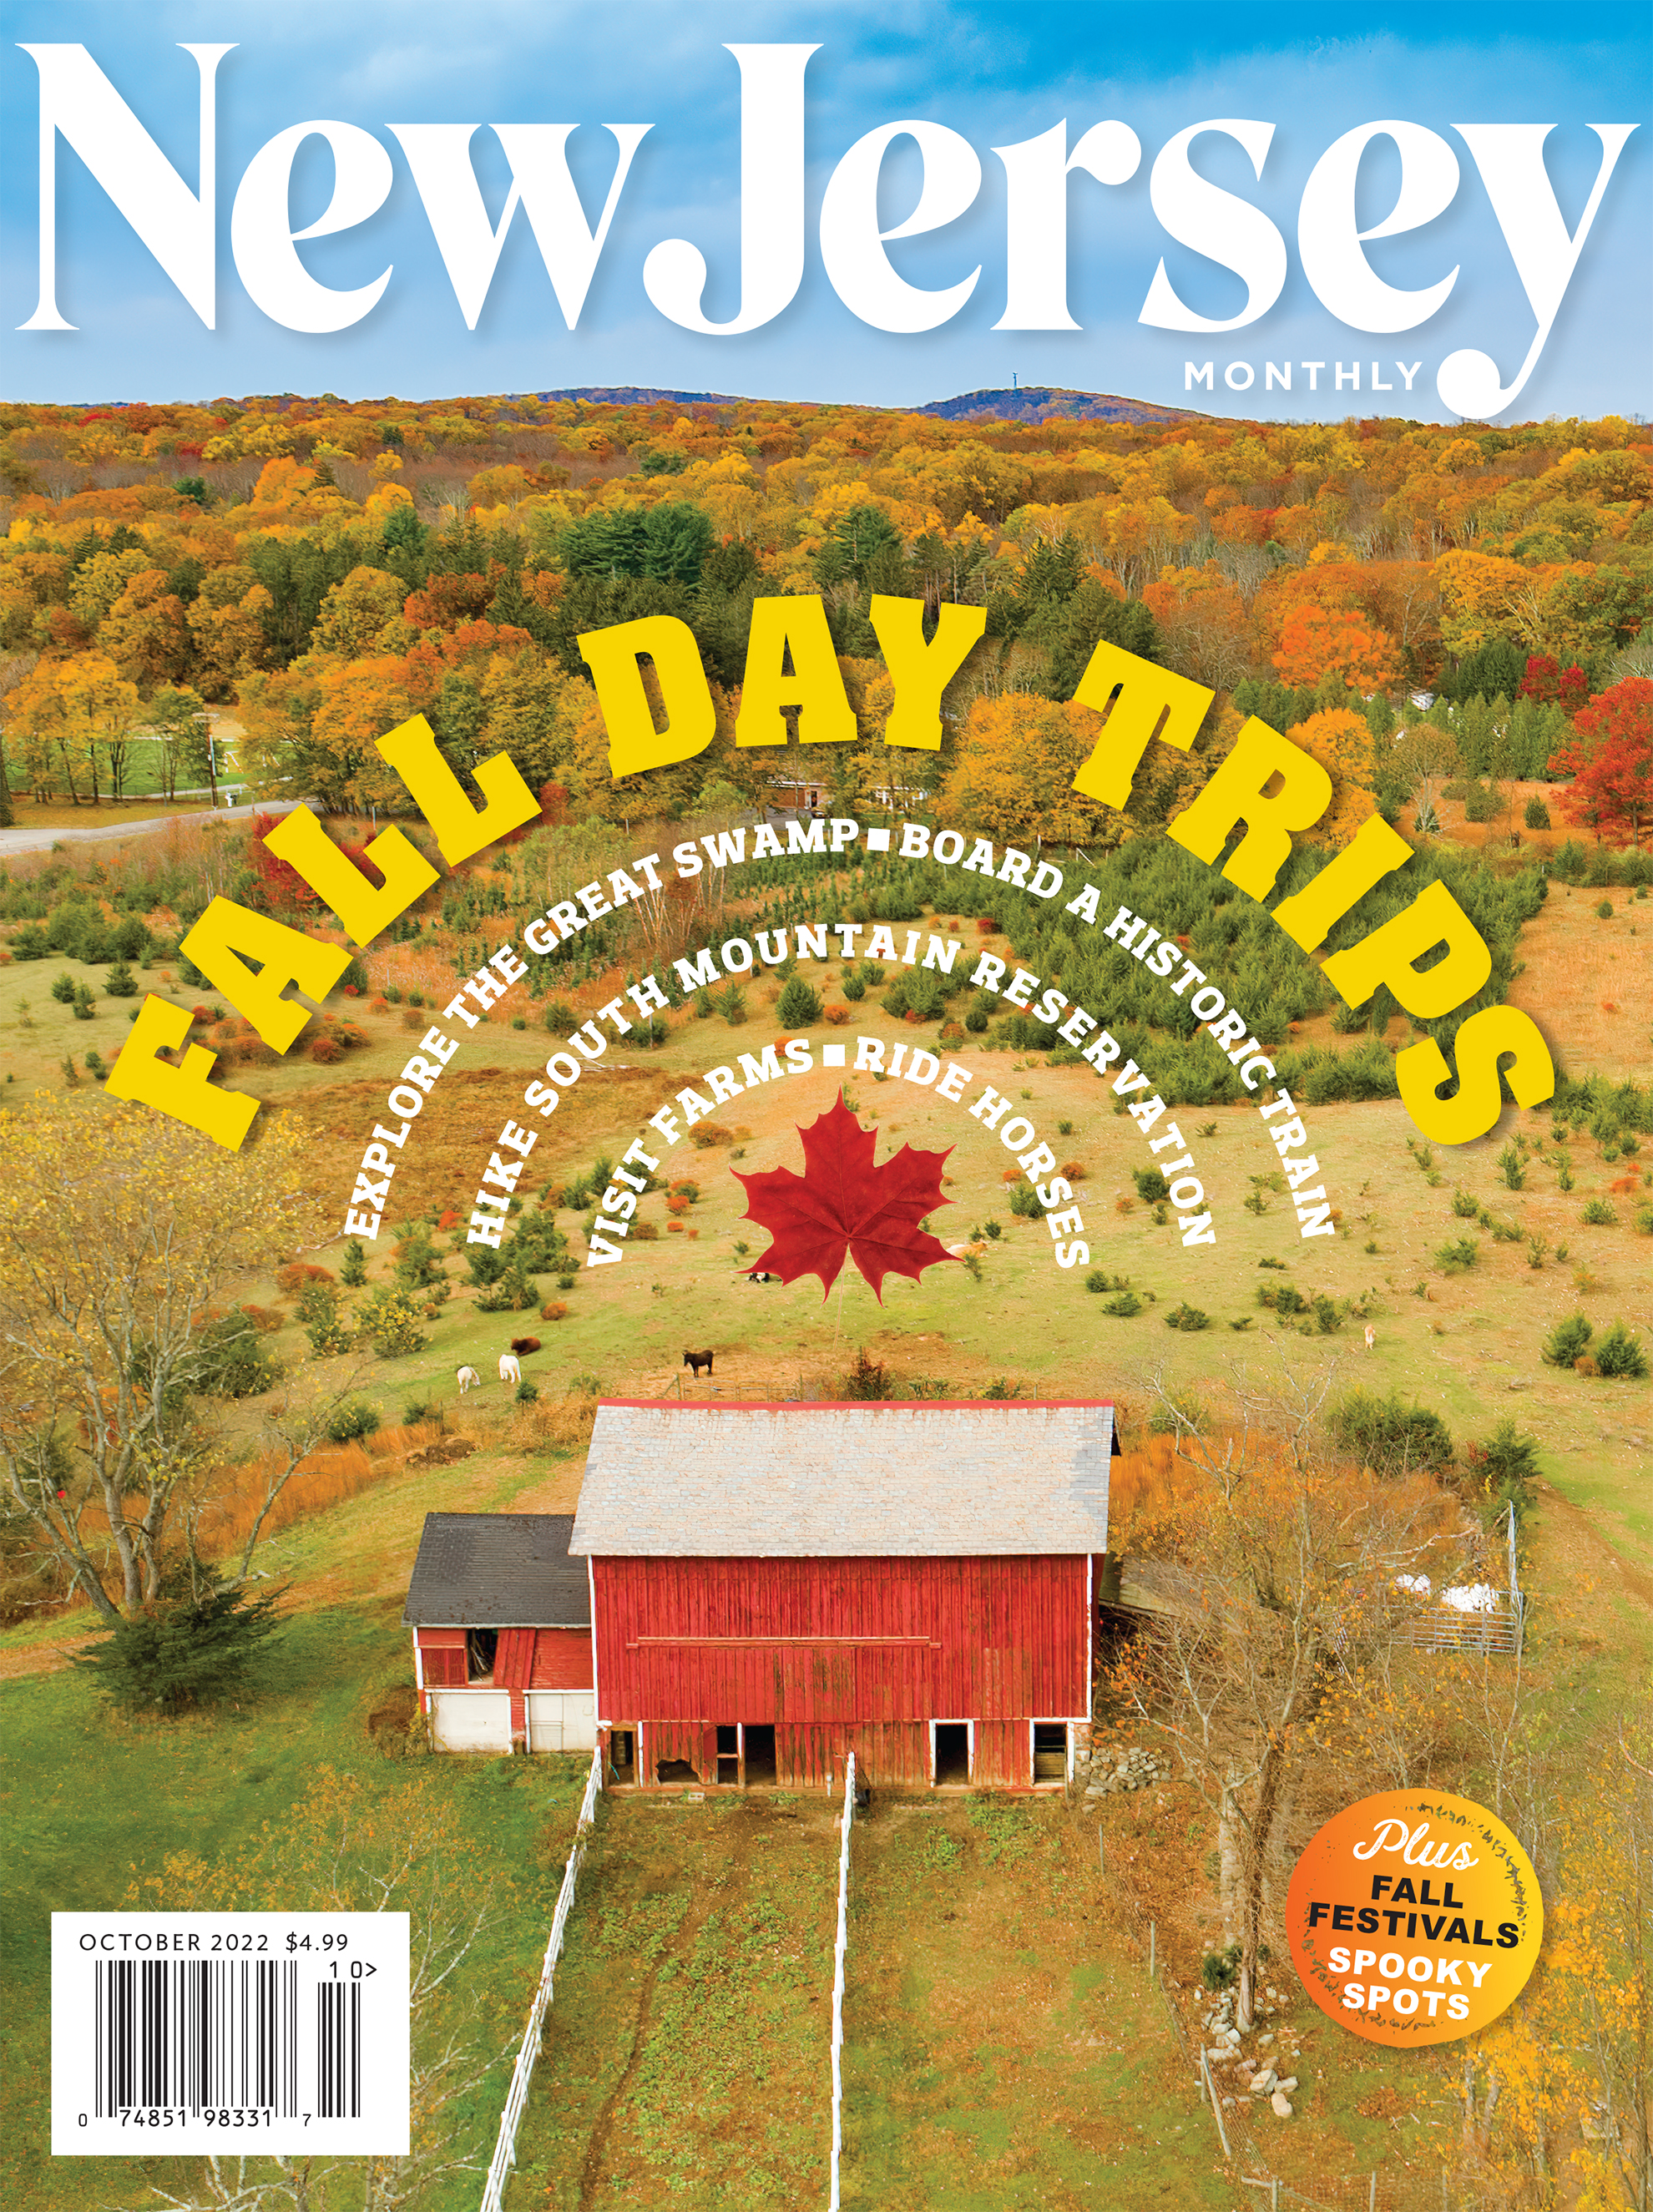 Cover of New Jersey Monthly Magazine with photo of Red Barn in the Fall taken with a Drone